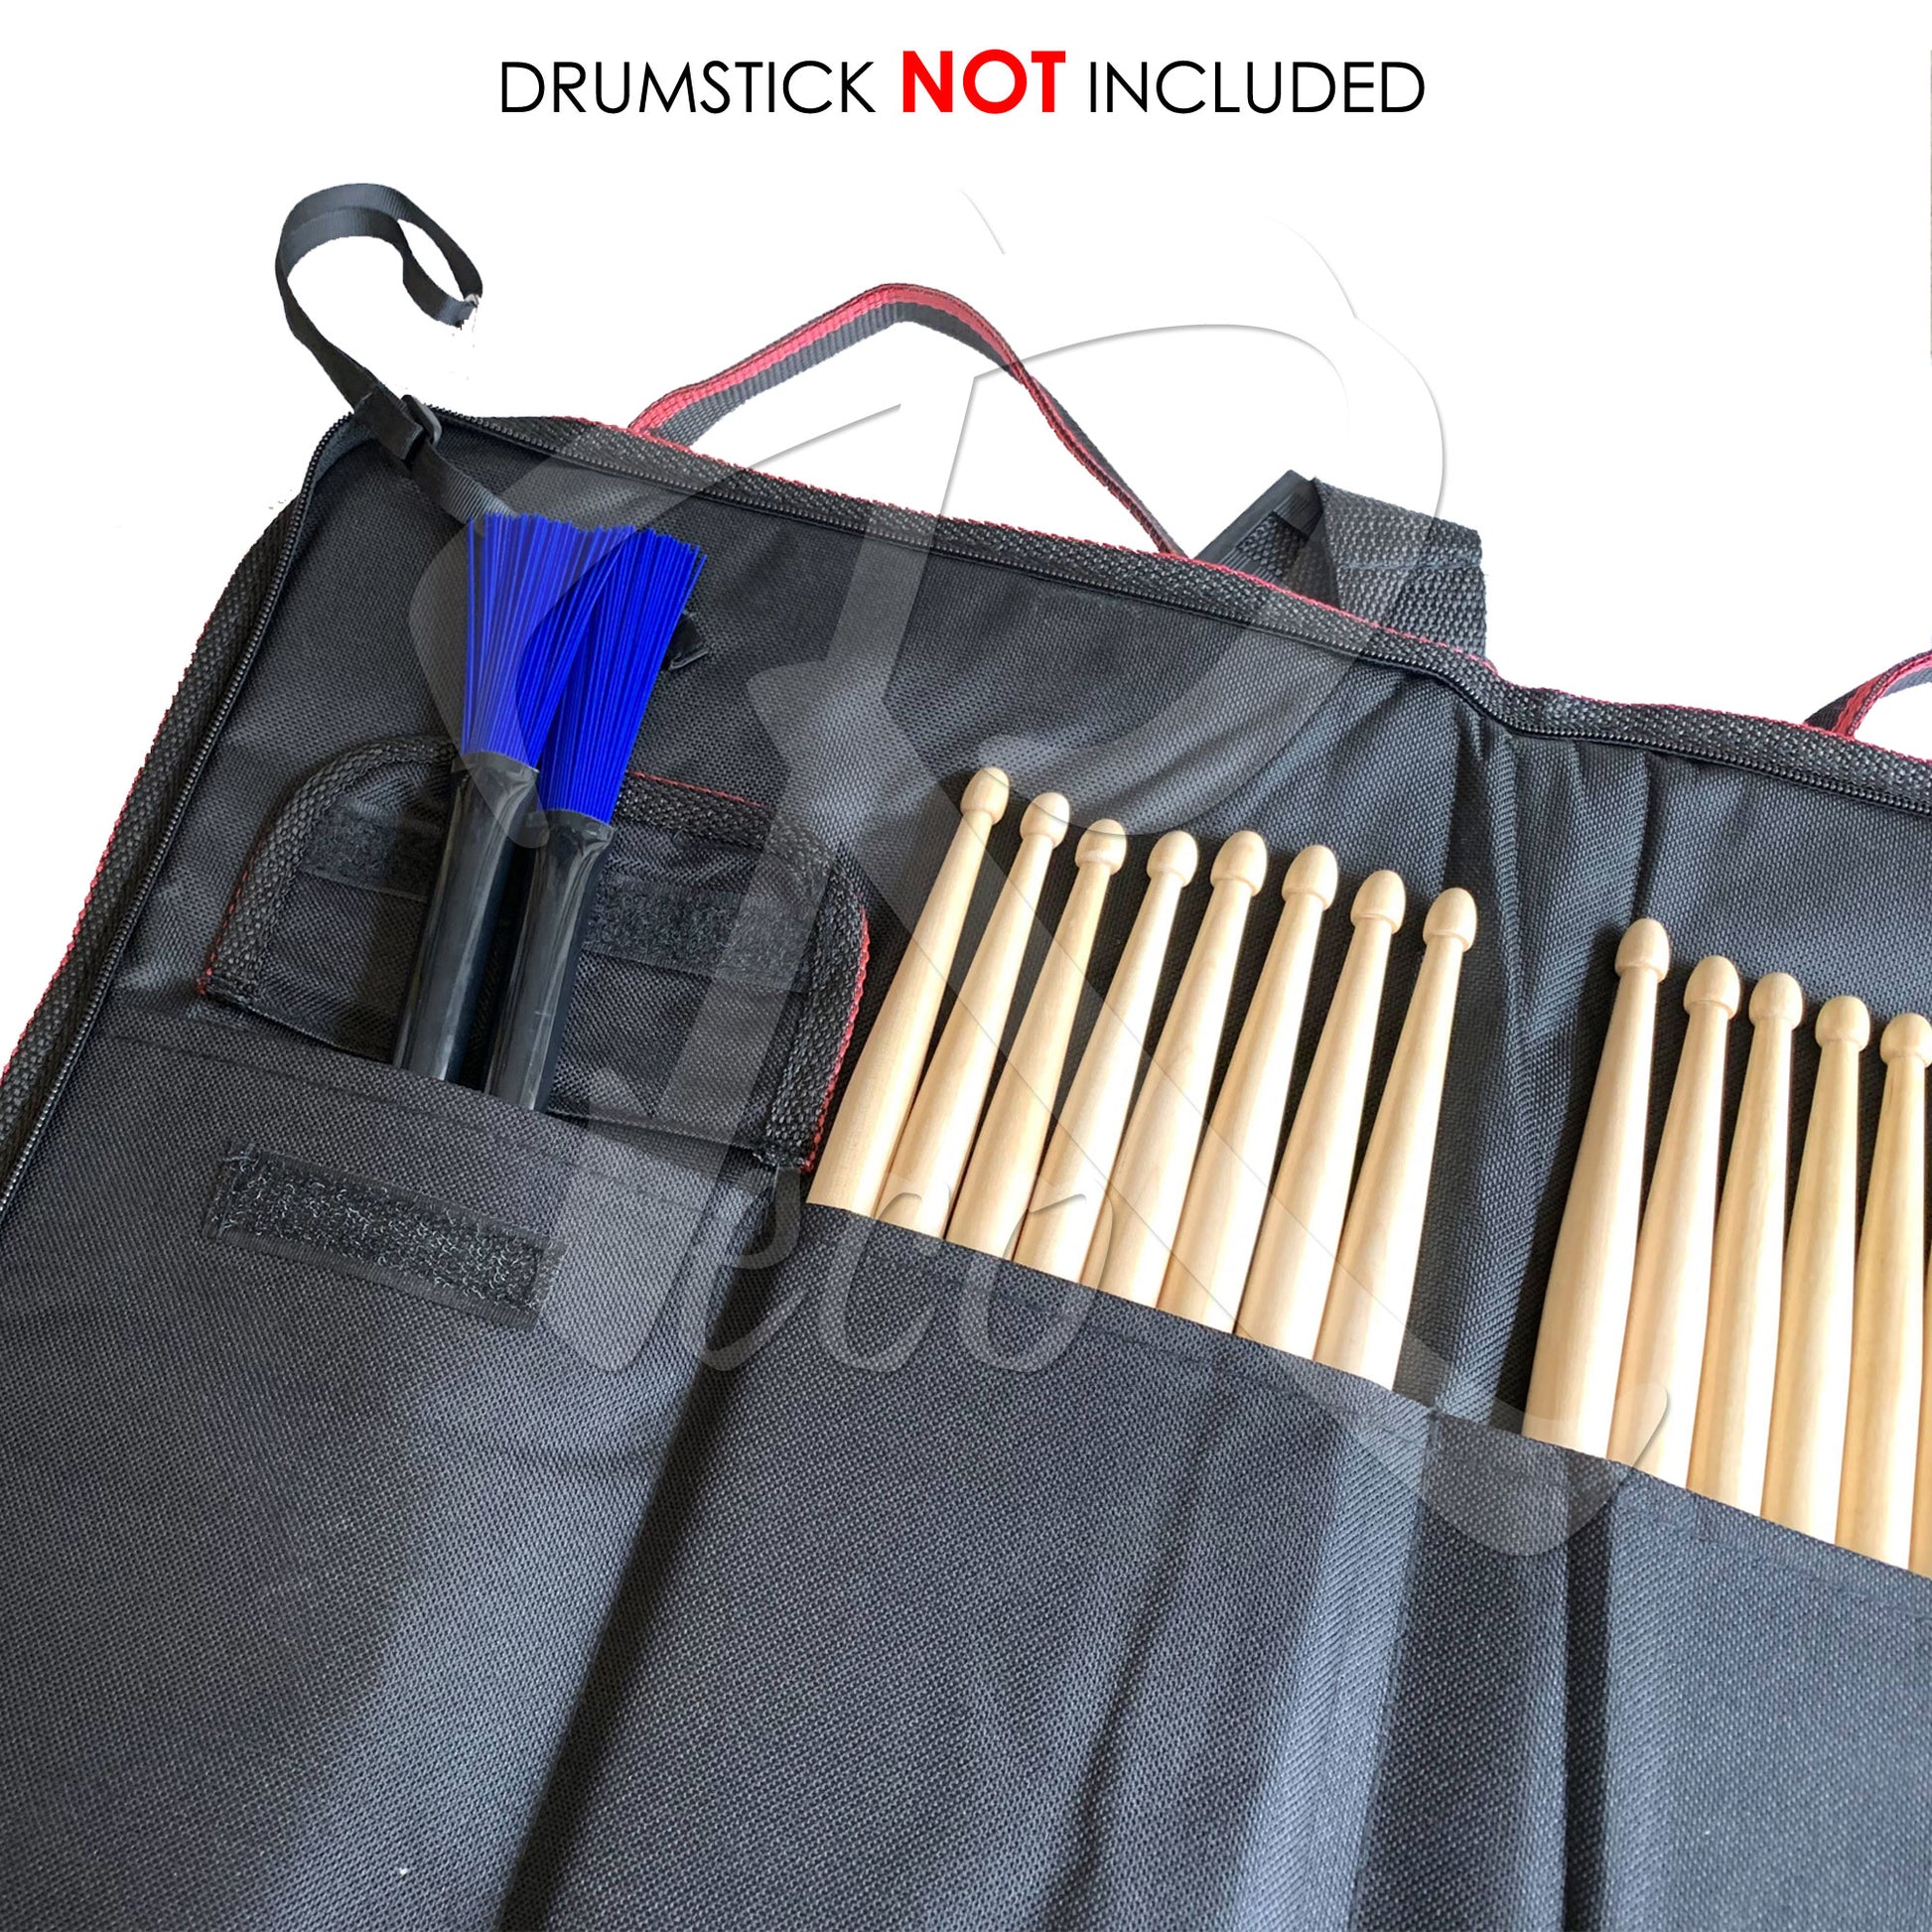 RM Extra Large Padded Drumstick Bag Stick Holder - Hold 12 Pairs Drumstick - Reco Music Malaysia